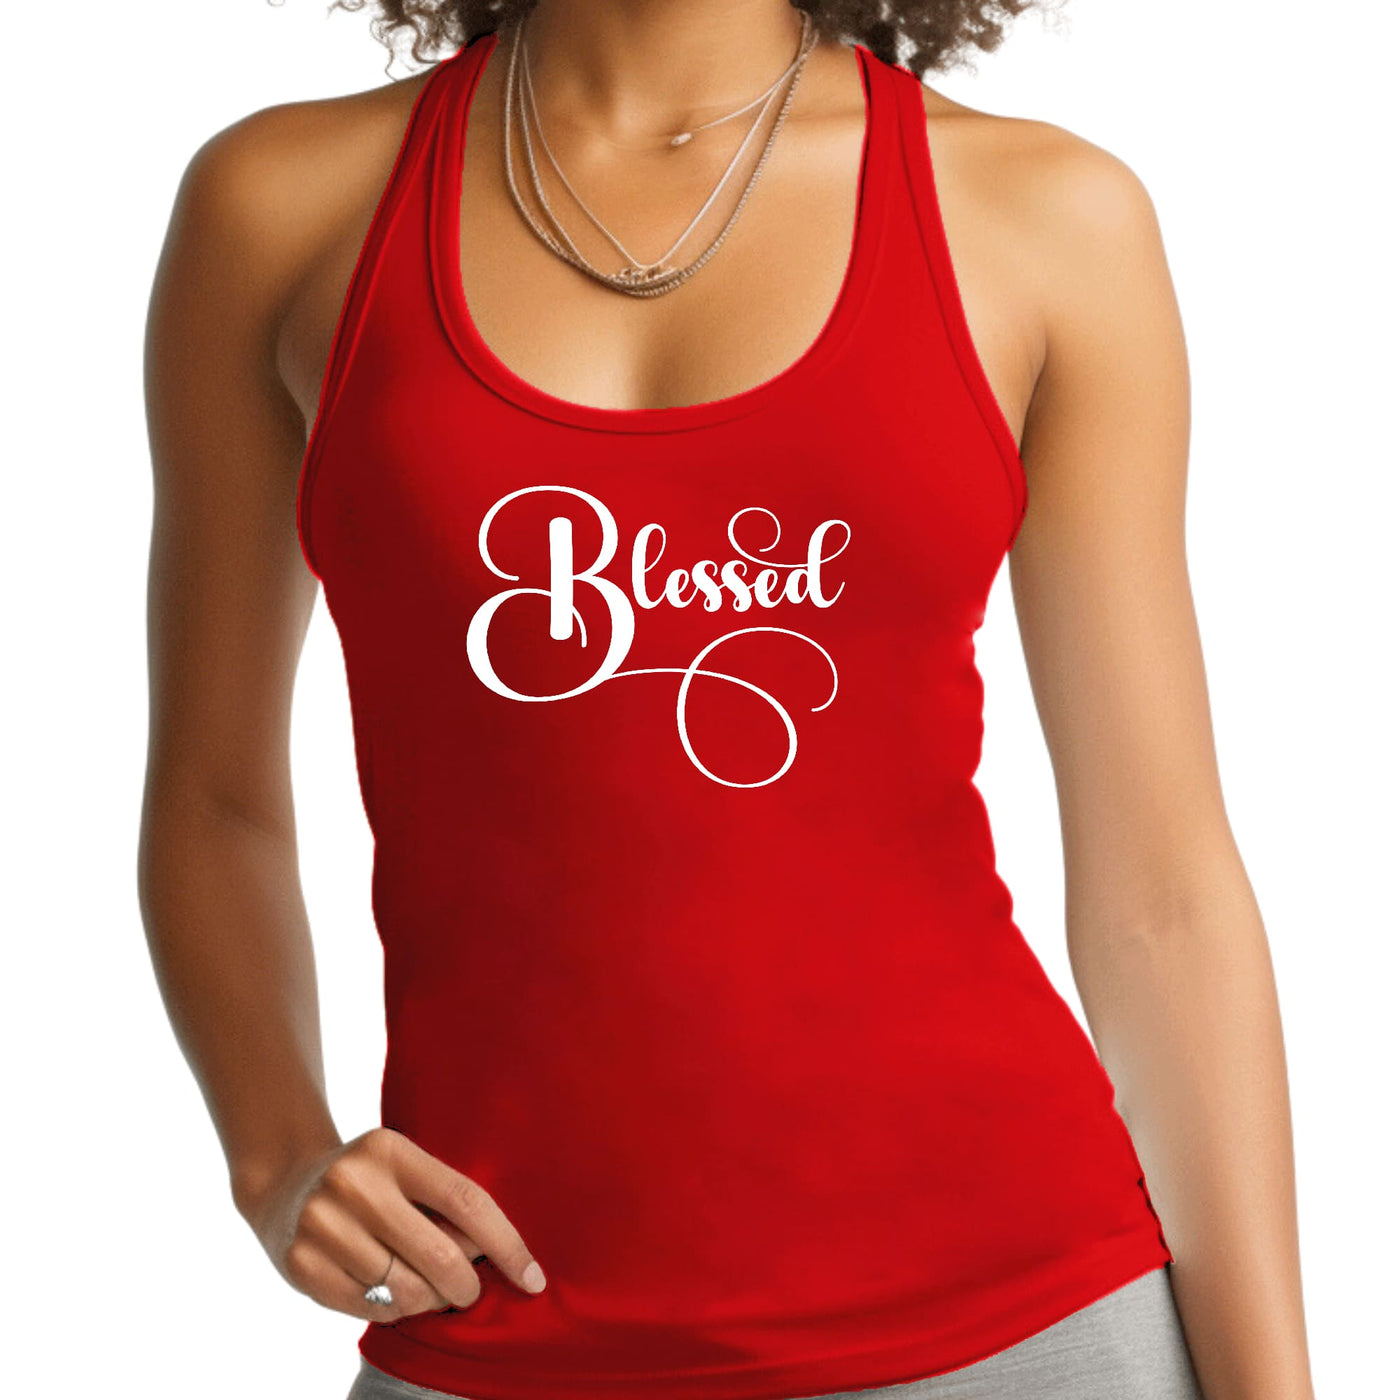 Womens Fitness Tank Top Graphic T-shirt Blessed Graphic Illustration - Womens